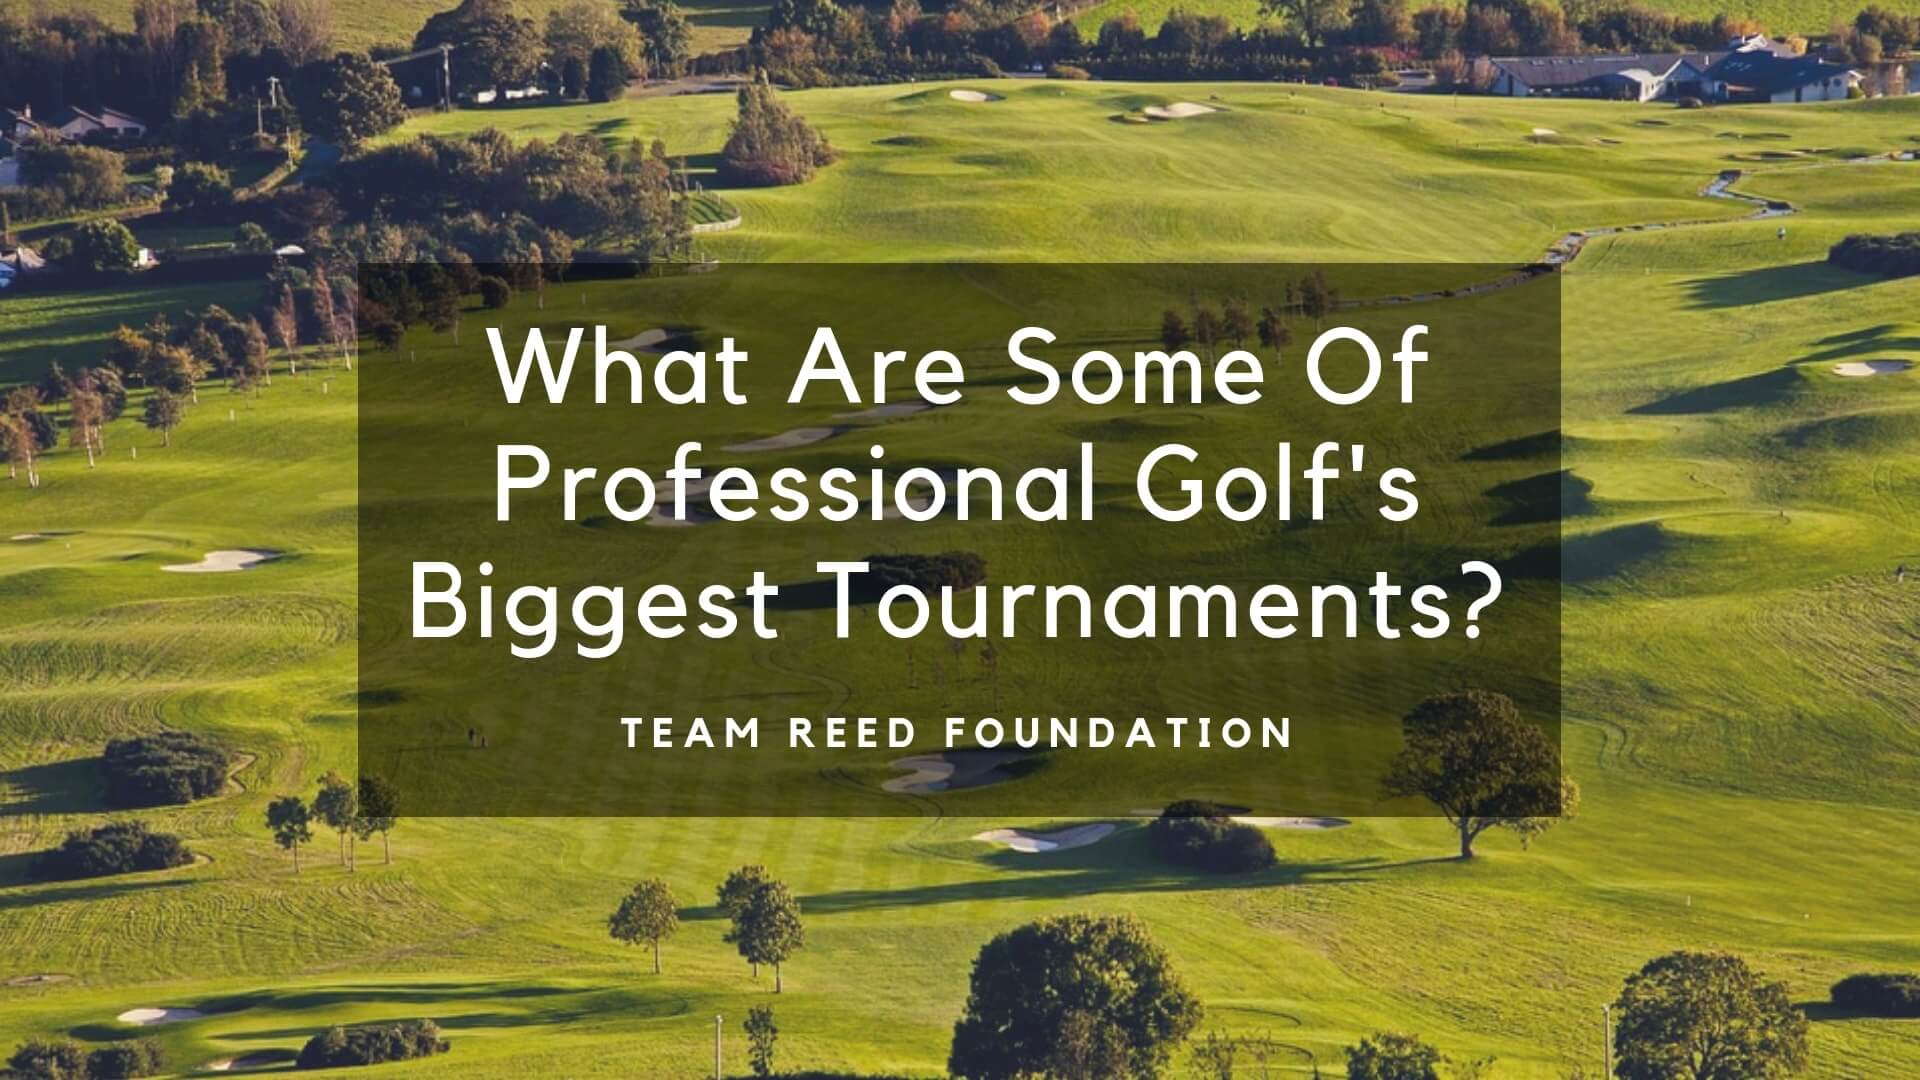 What Are Some Of Professional Golf’s Biggest Tournaments?